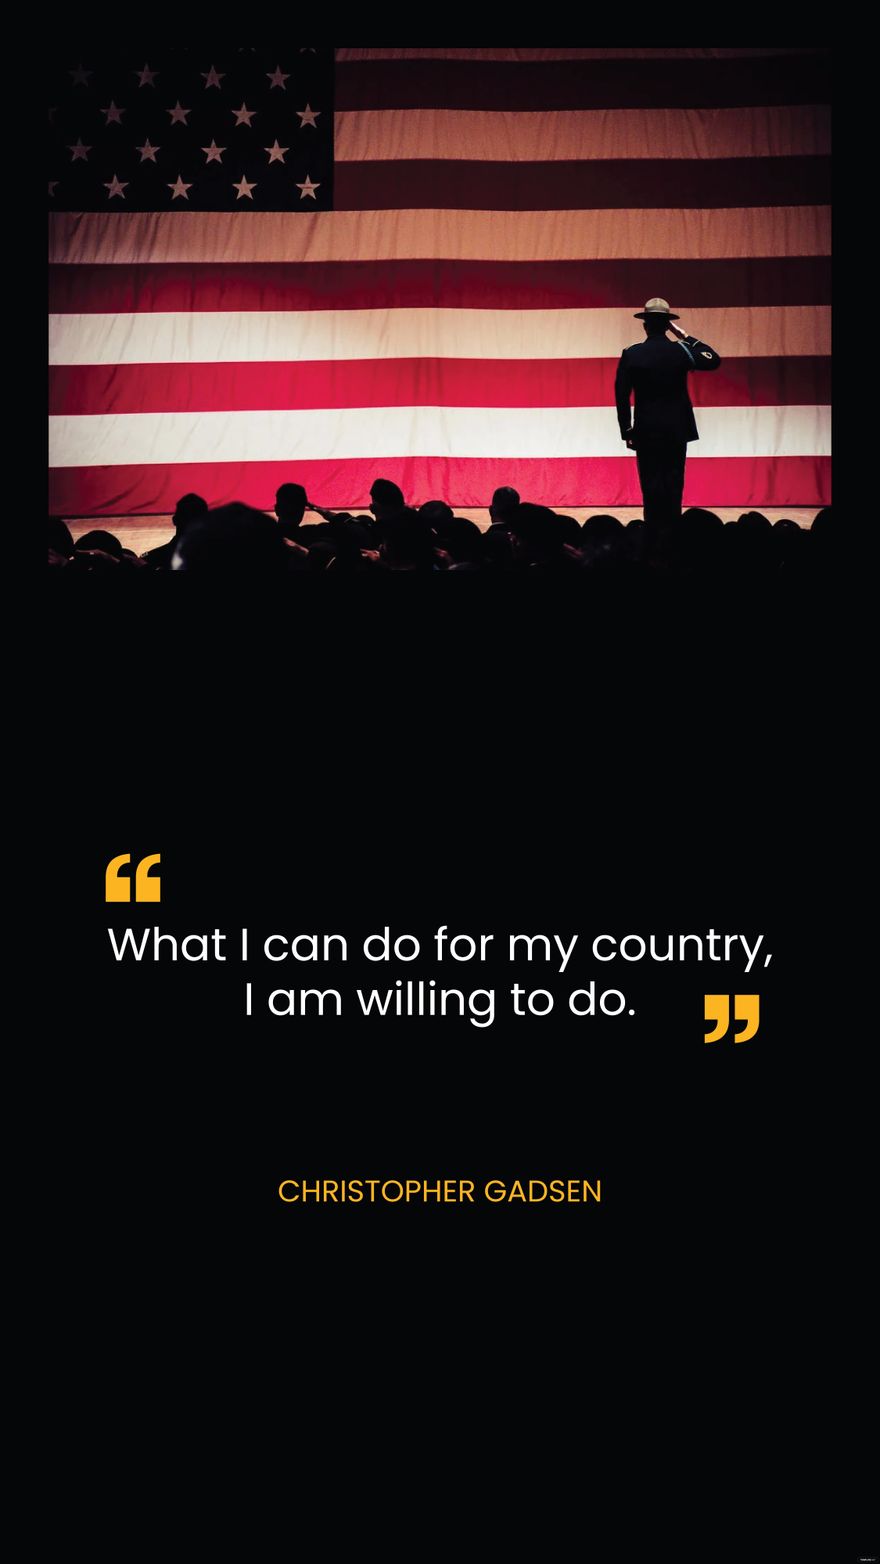 Free Christopher Gadsden - What I can do for my country, I am willing to do.  in JPG